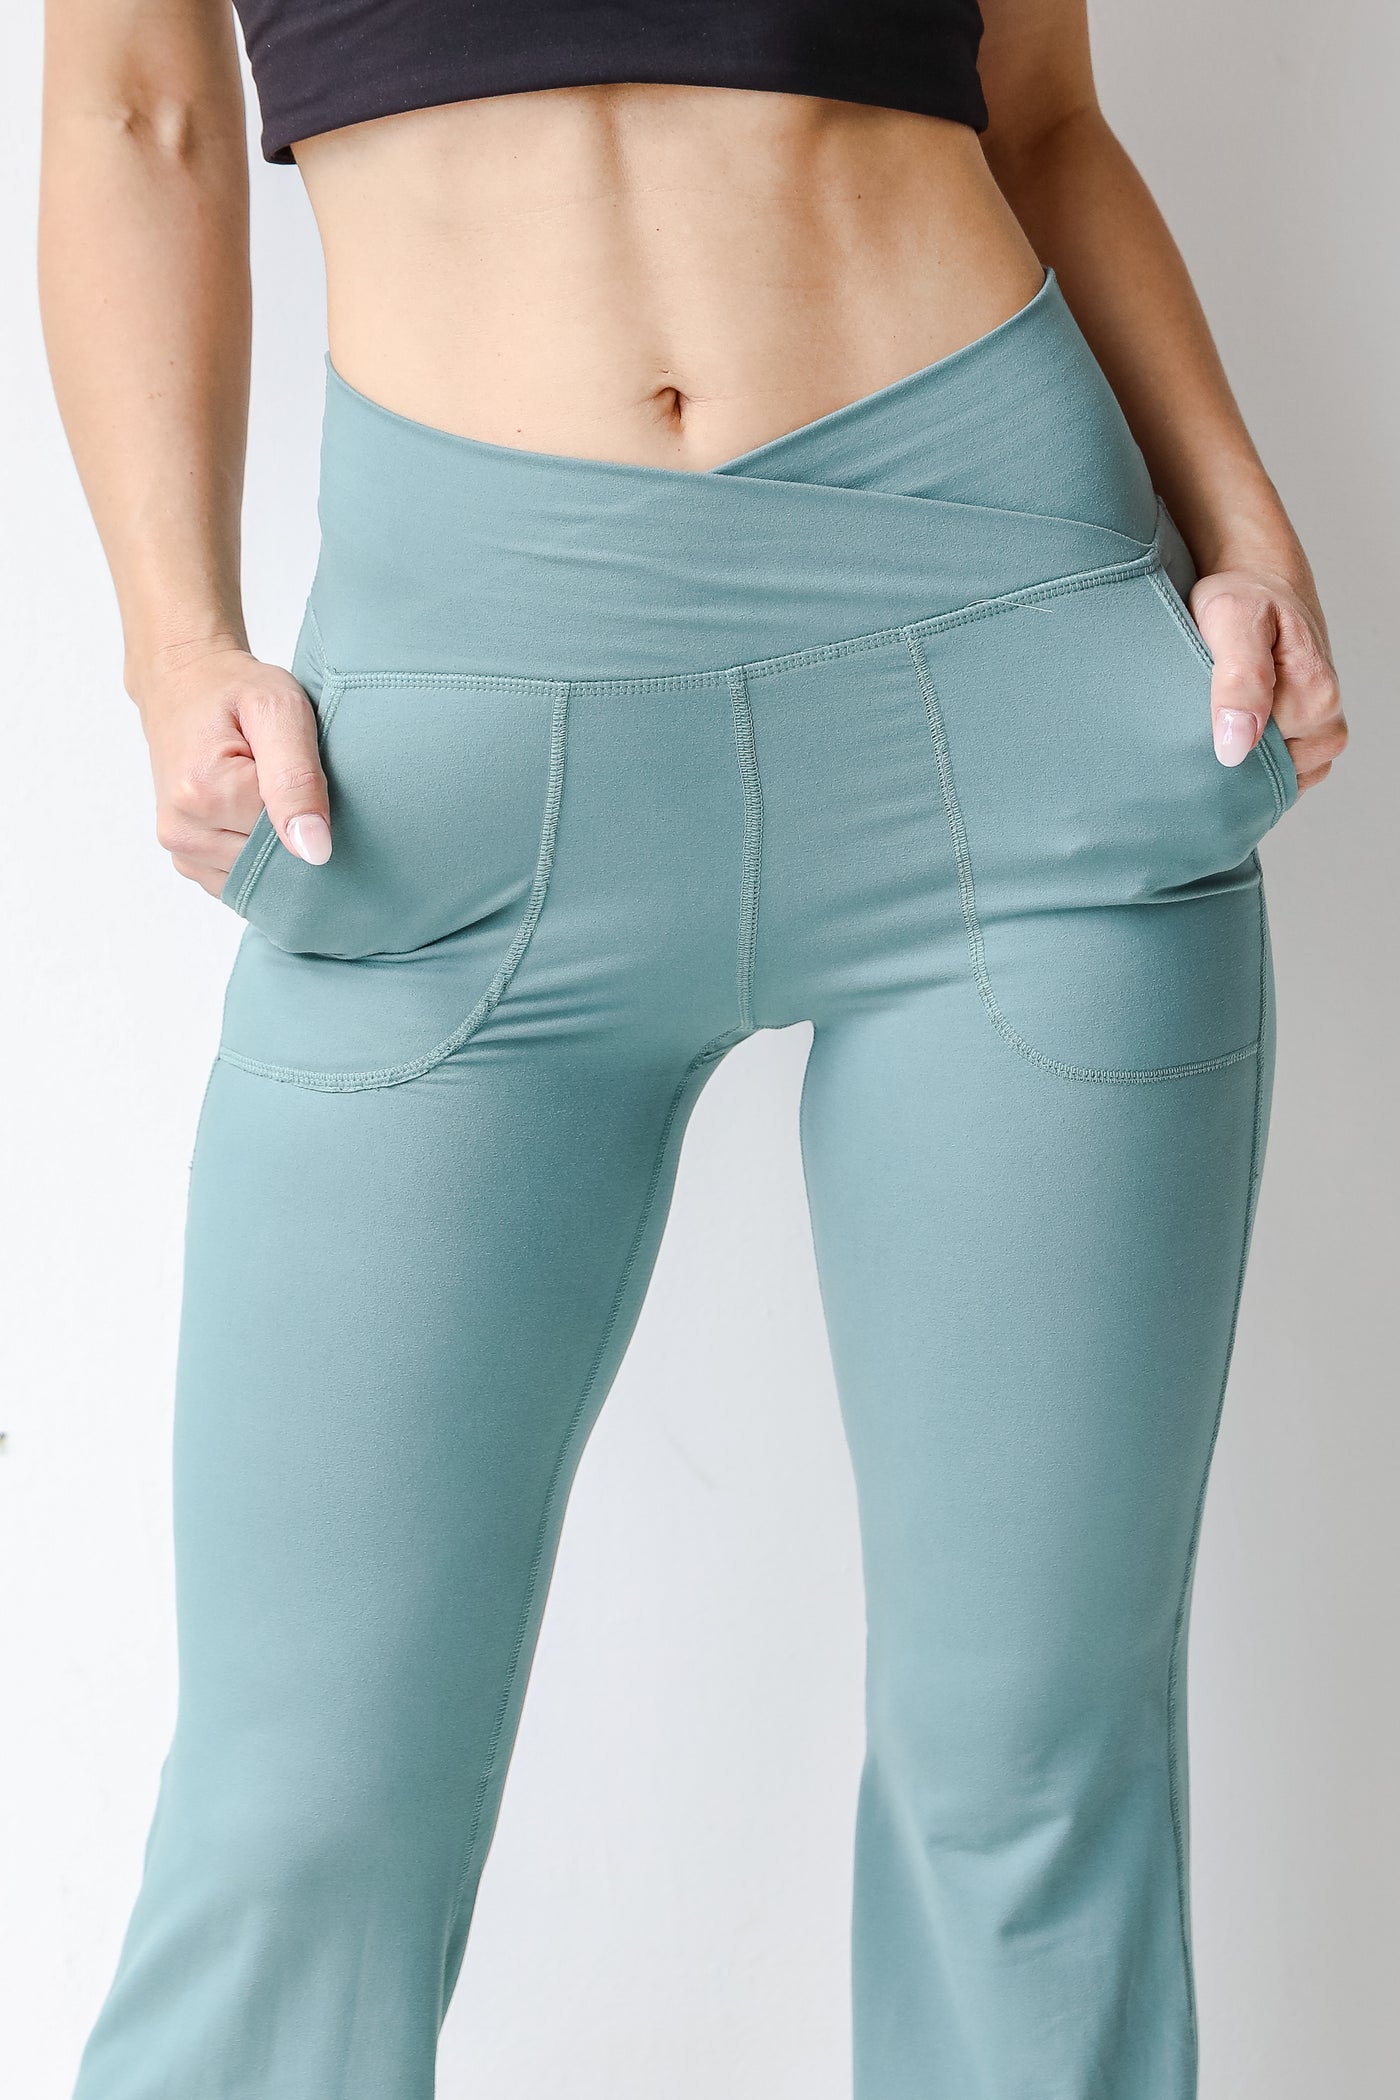 Crossover Flared Leggings in teal close up